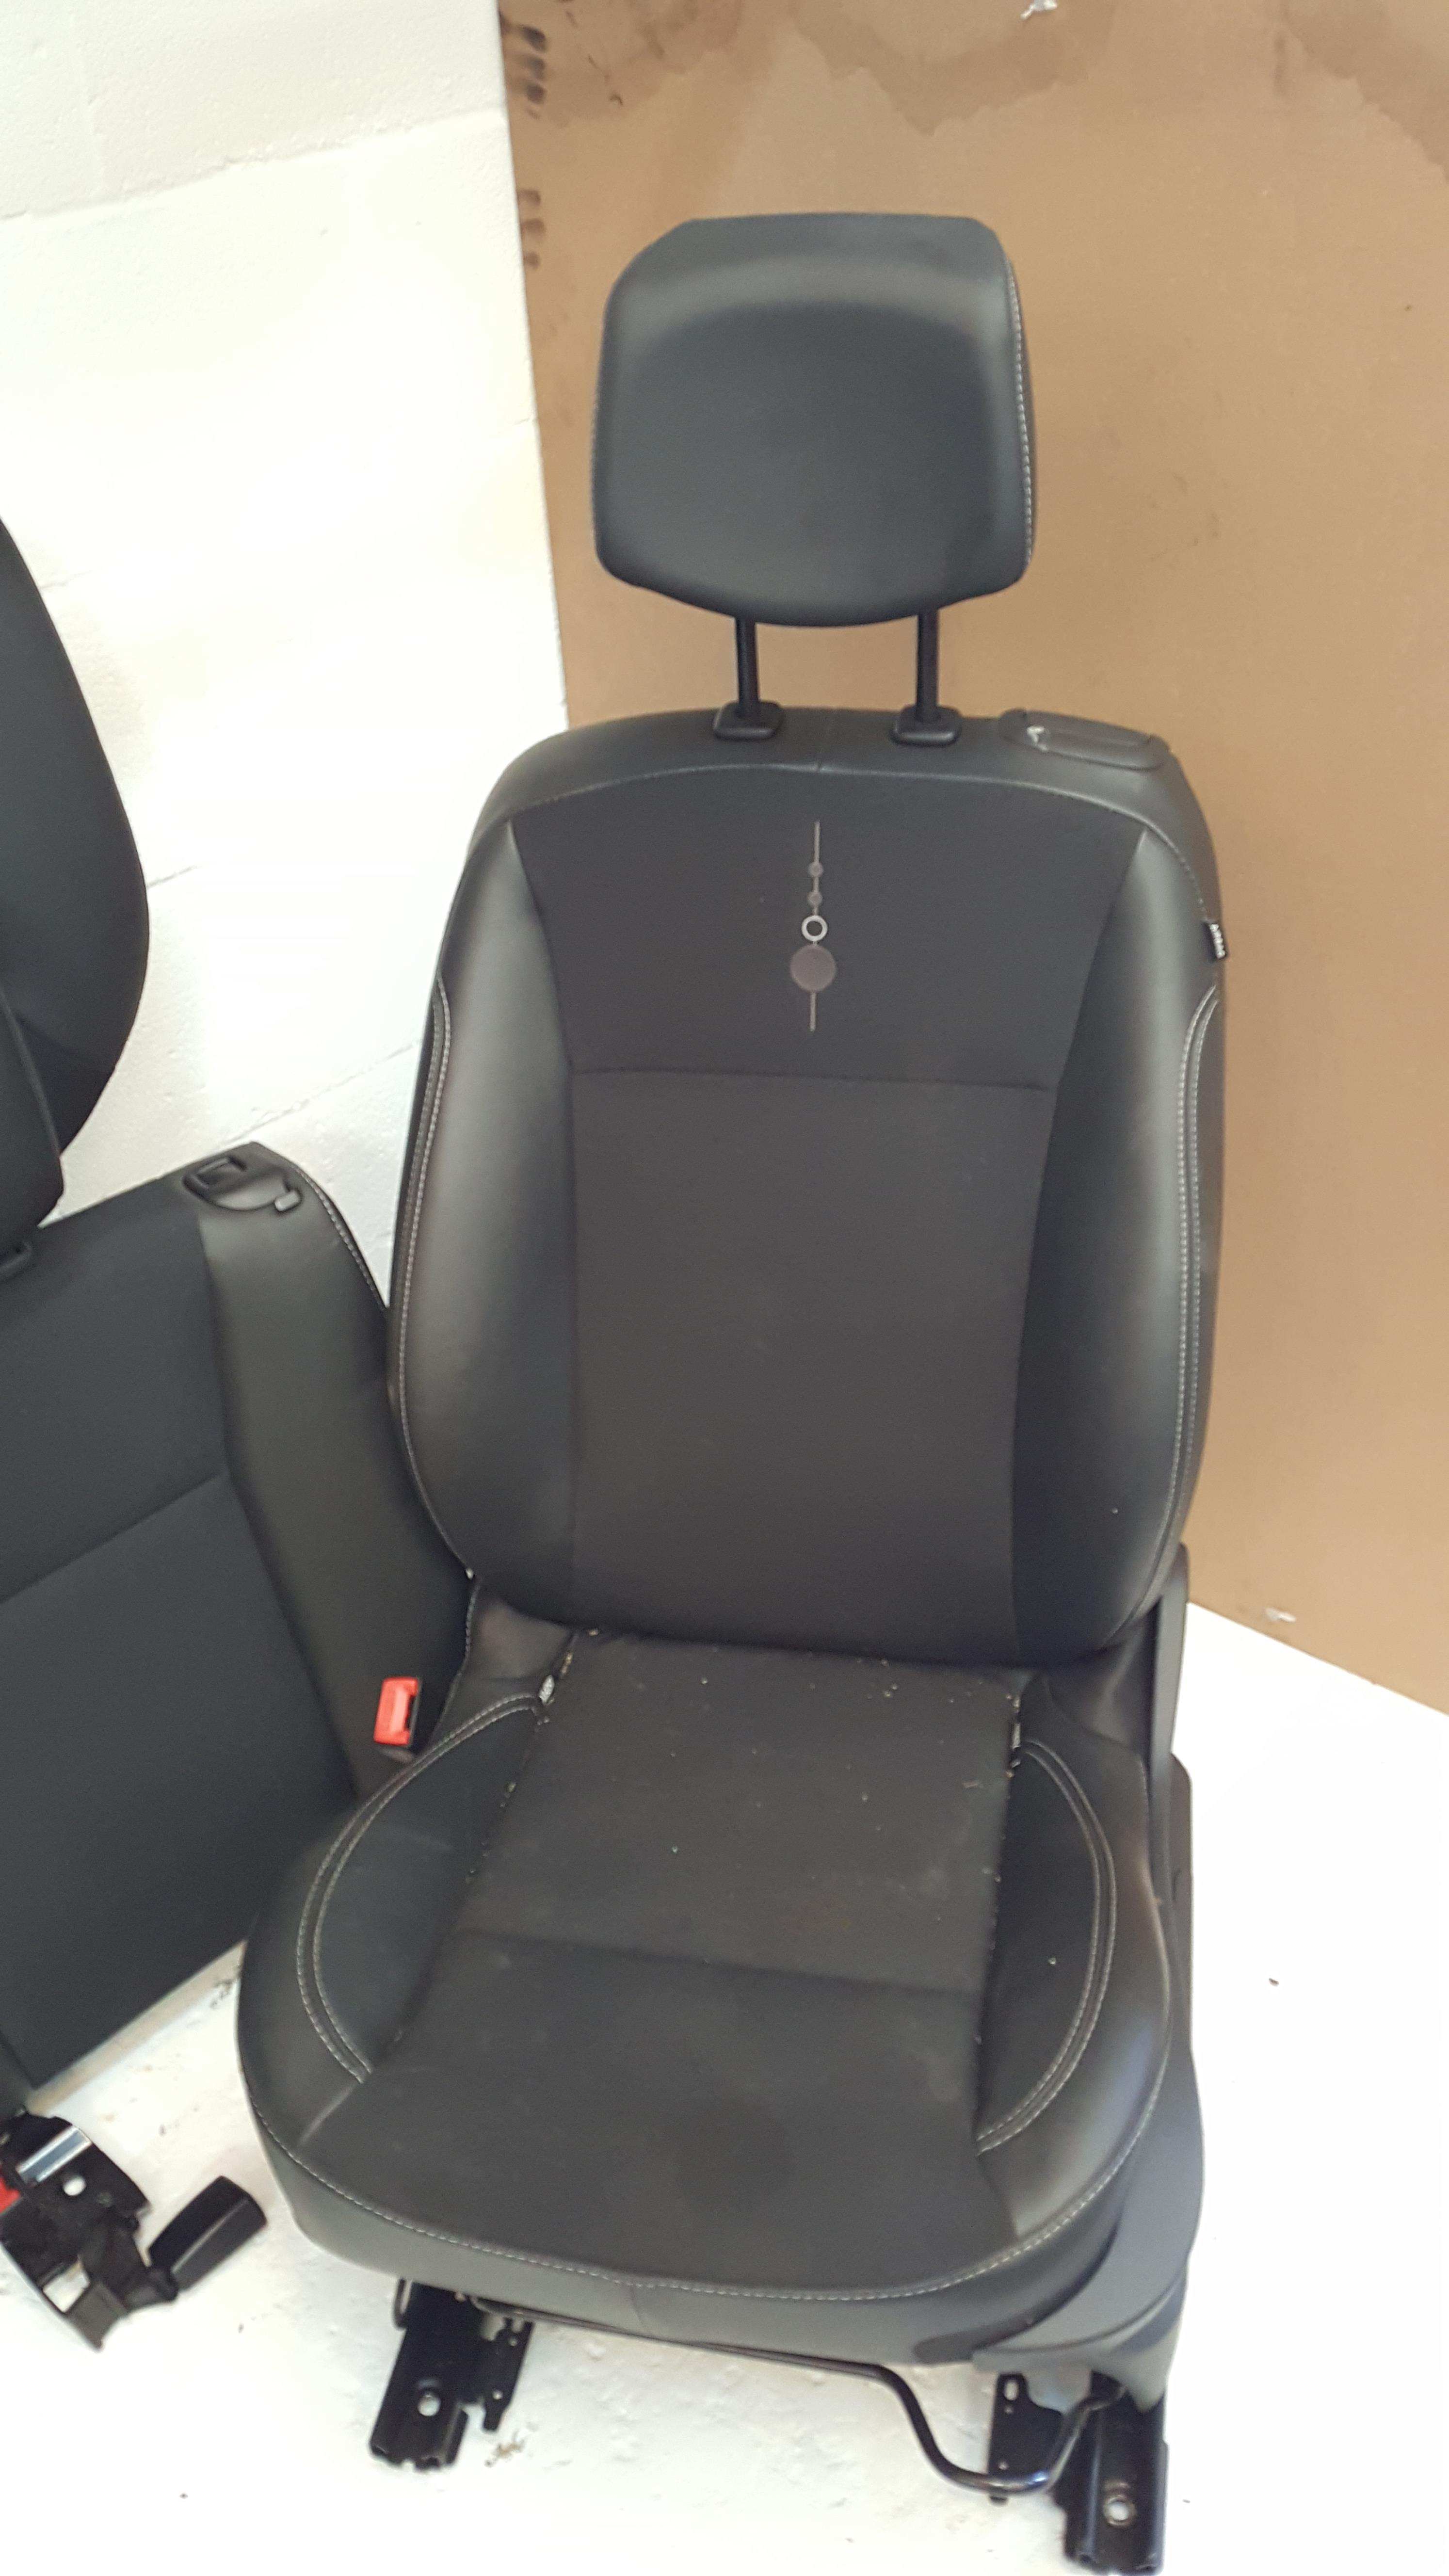 Renault Clio MK3 2005-2012 Interior Seats Chairs SET Bench Half Leather 3Dr